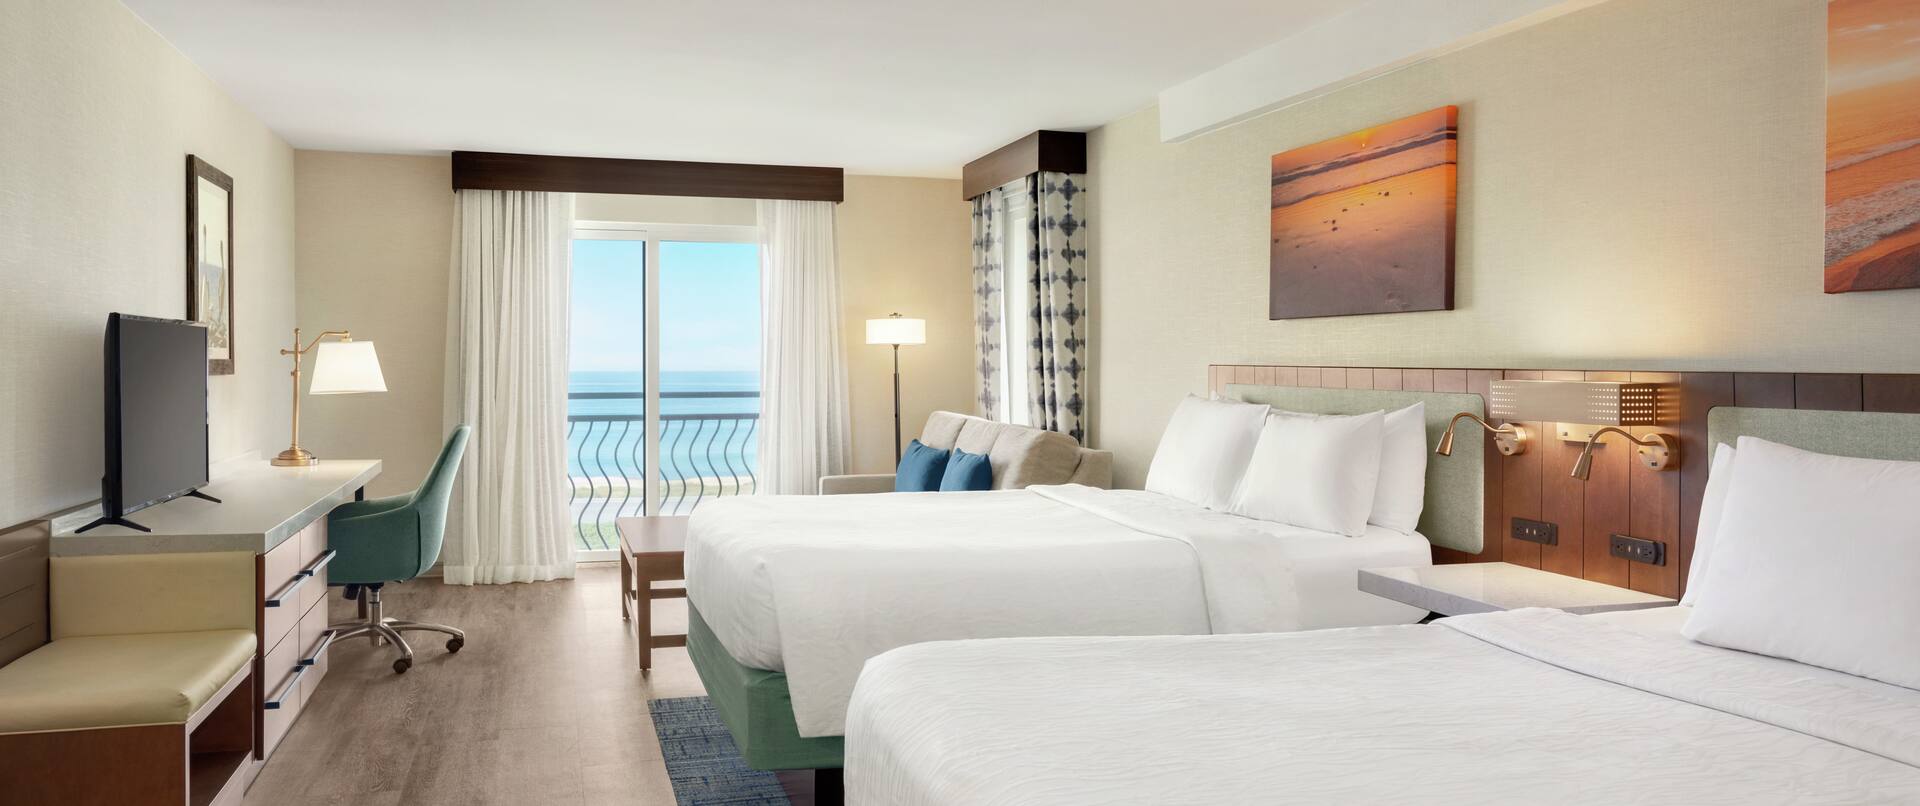 Spacious deluxe guest room featuring two comfortable queen beds, TV, work desk, and stunning ocean view.